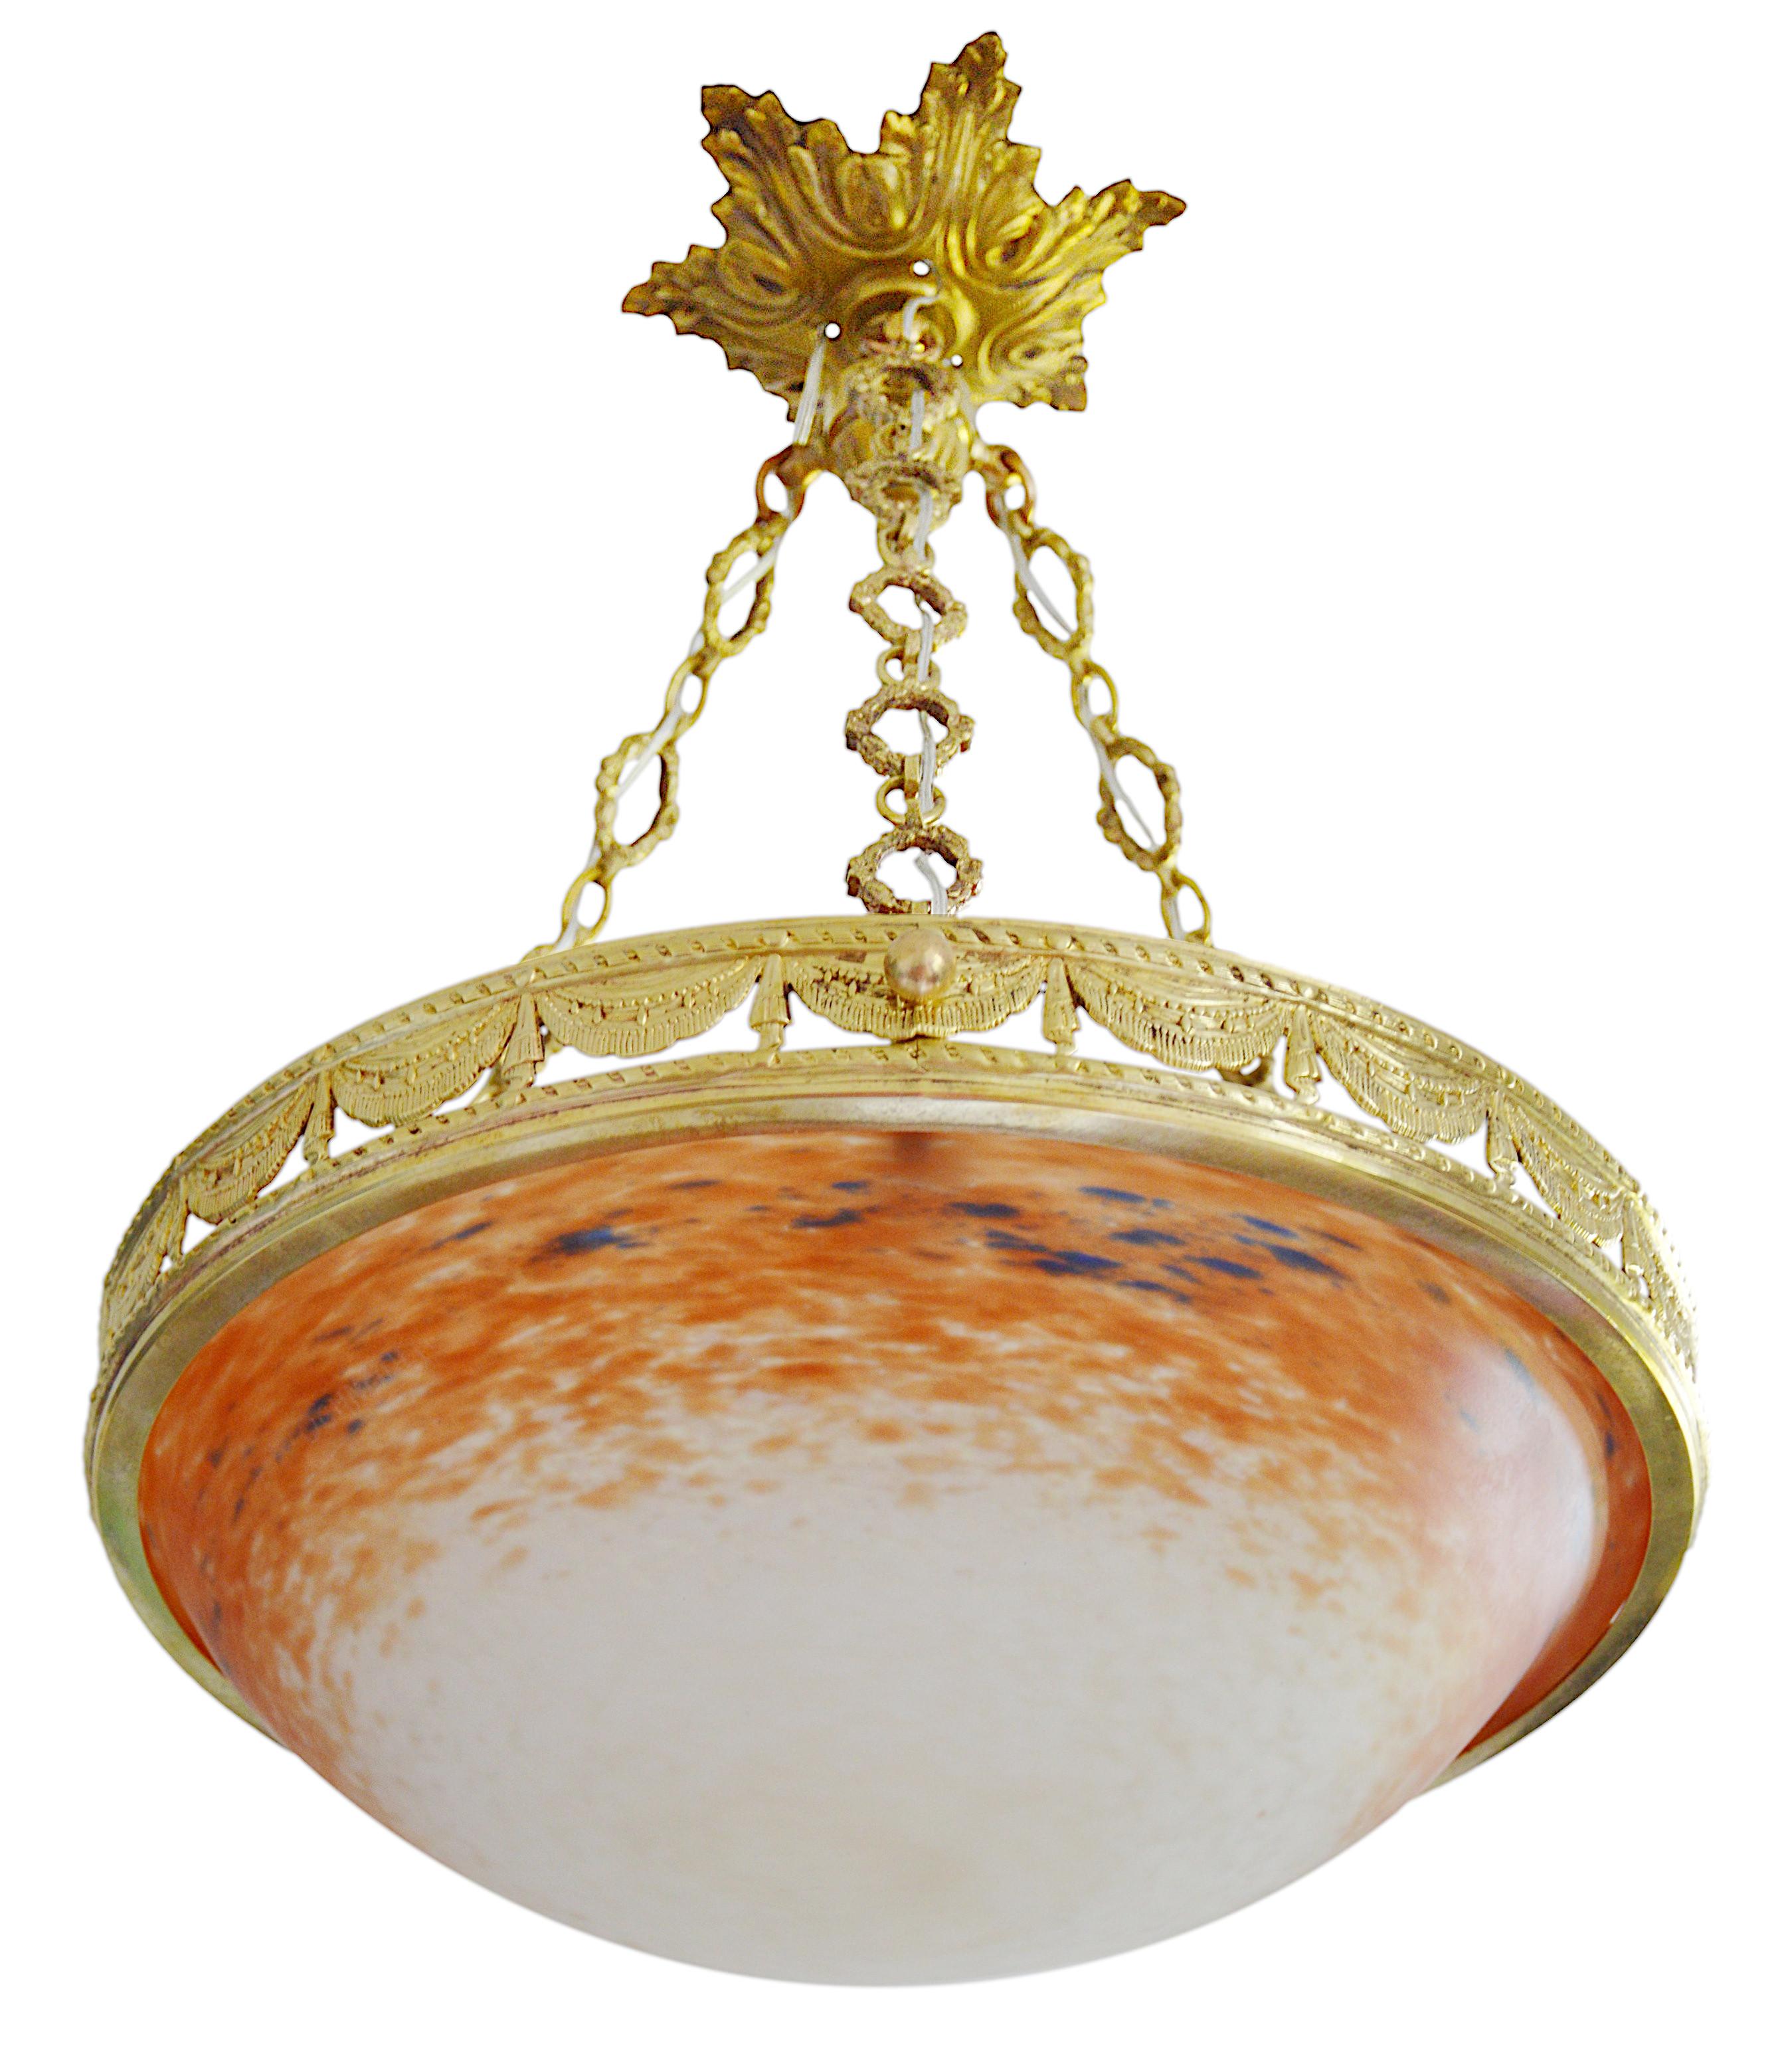 French Art Deco pendant chandelier by Charles Schneider, Epinay-sur-Seine (Paris), 1920s. Mottled glass shade, powders are applied between two layers, that comes hung at its elegant solid bronze fixture. Height : 19.7